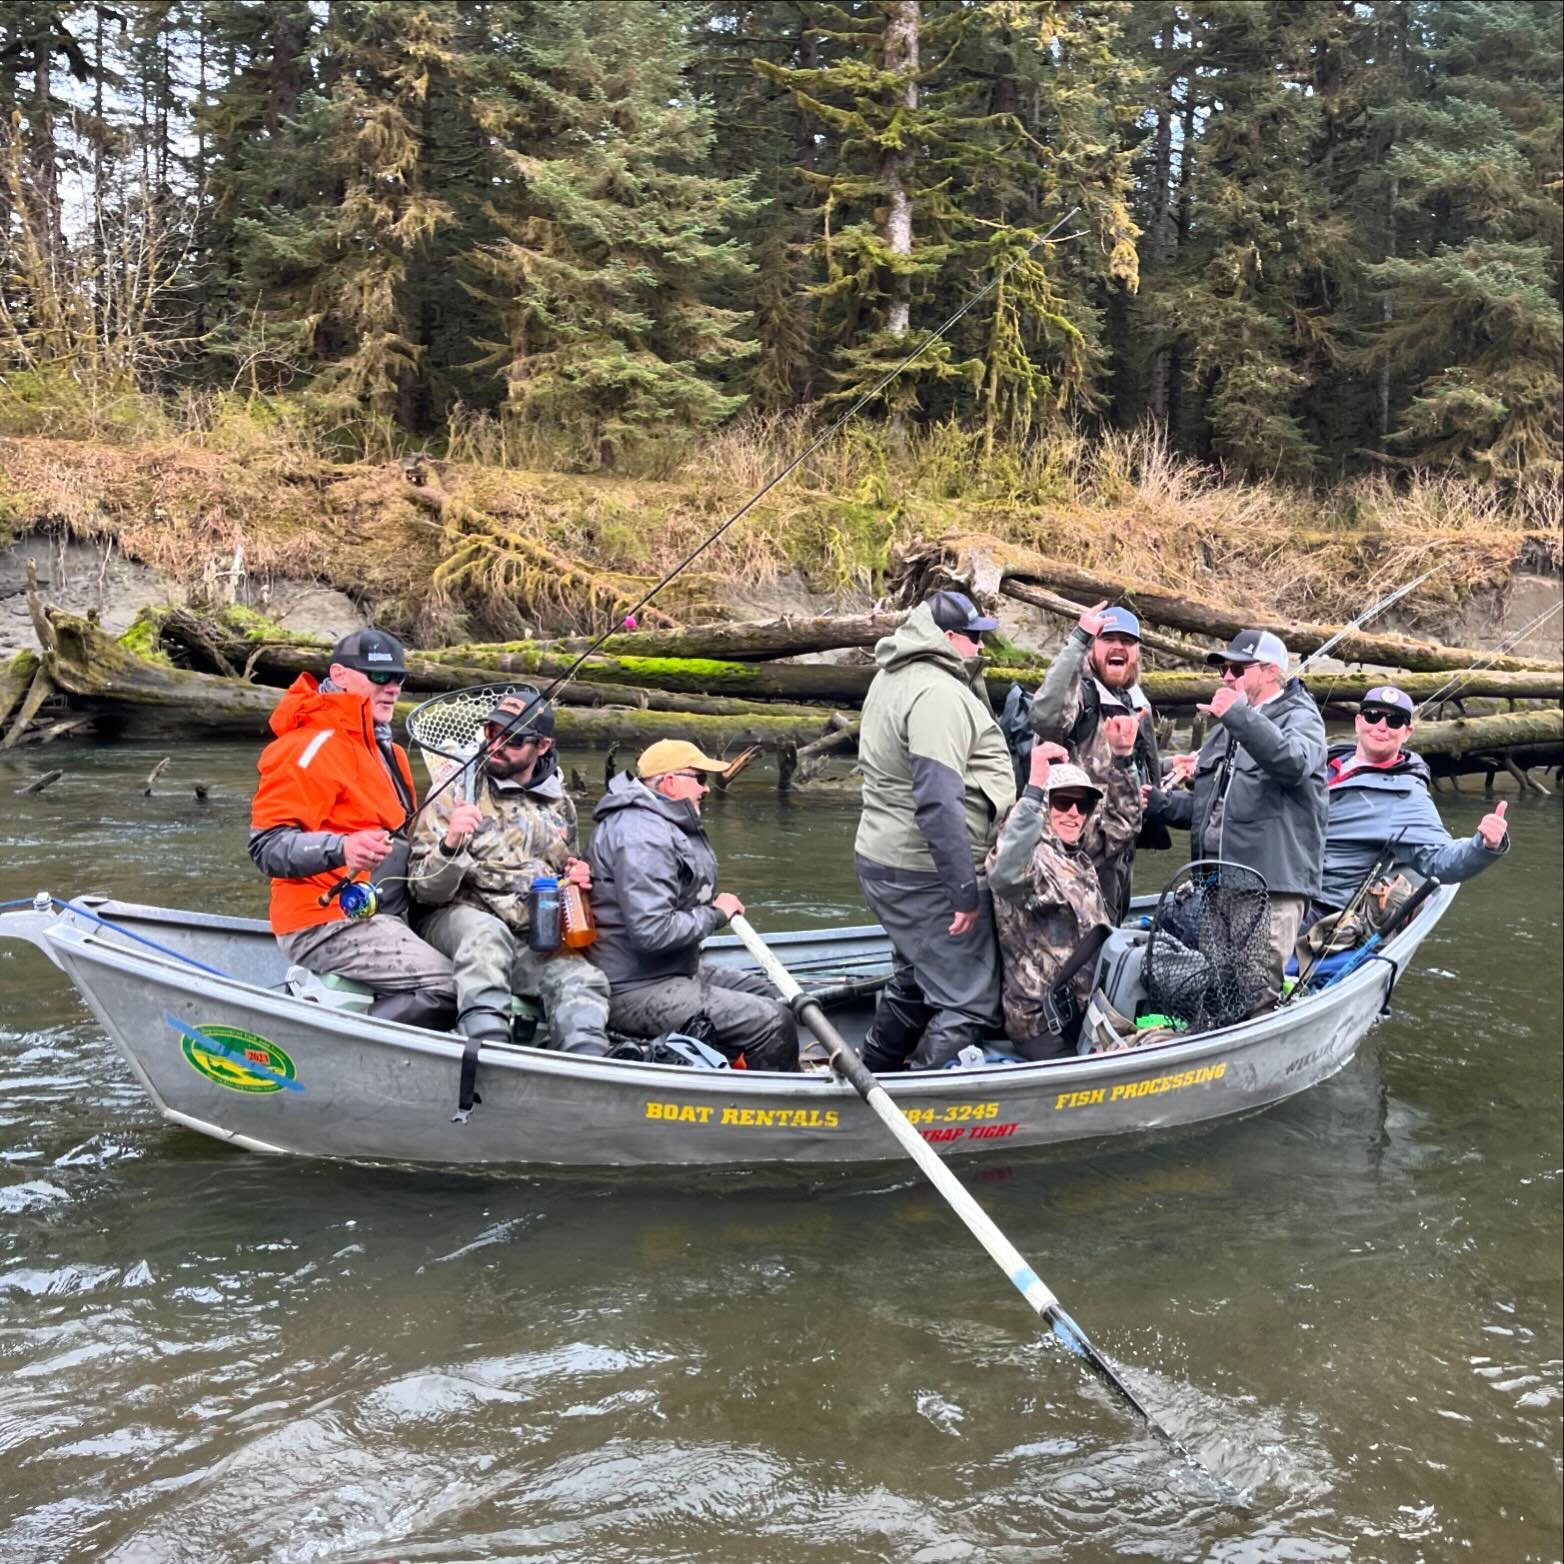 Good times with the FishHound crew and friends on our annual &ldquo;team building&rdquo; trip! Steely caught and lost, many, many beers crushed, and way too much whiskey! Love all you monsters! Till next year&hellip;

#flyfishing #guidedayoff #steely